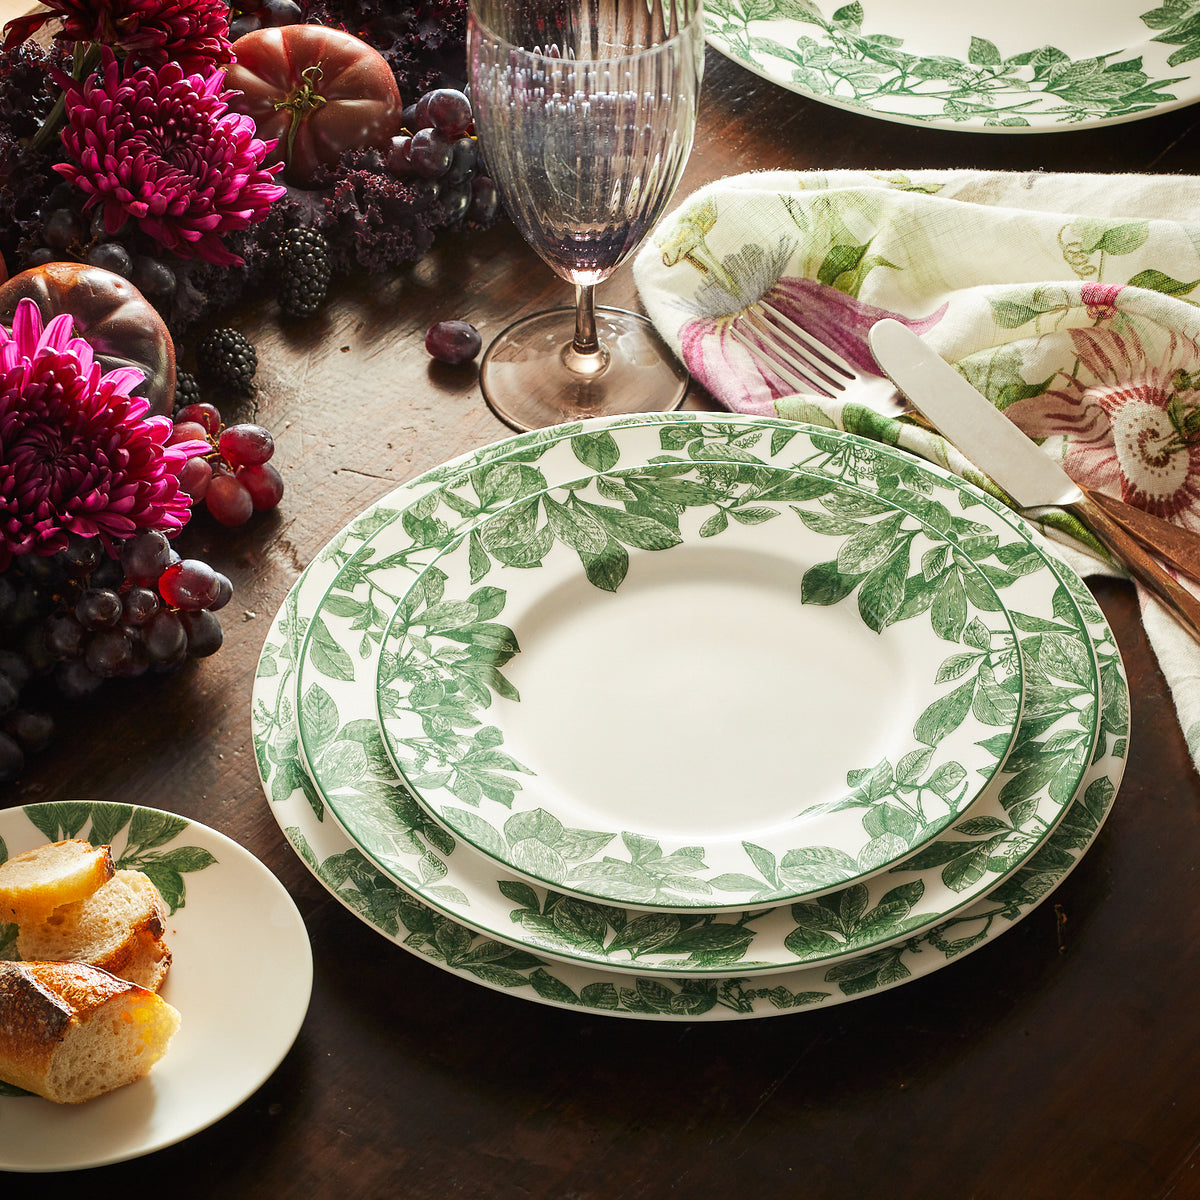 A table is set with Caskata Arbor Green Rimmed Dinner Plate, accompanied by a floral-patterned napkin, bread on a side plate, a glass, and a centerpiece of flowers and fruits.